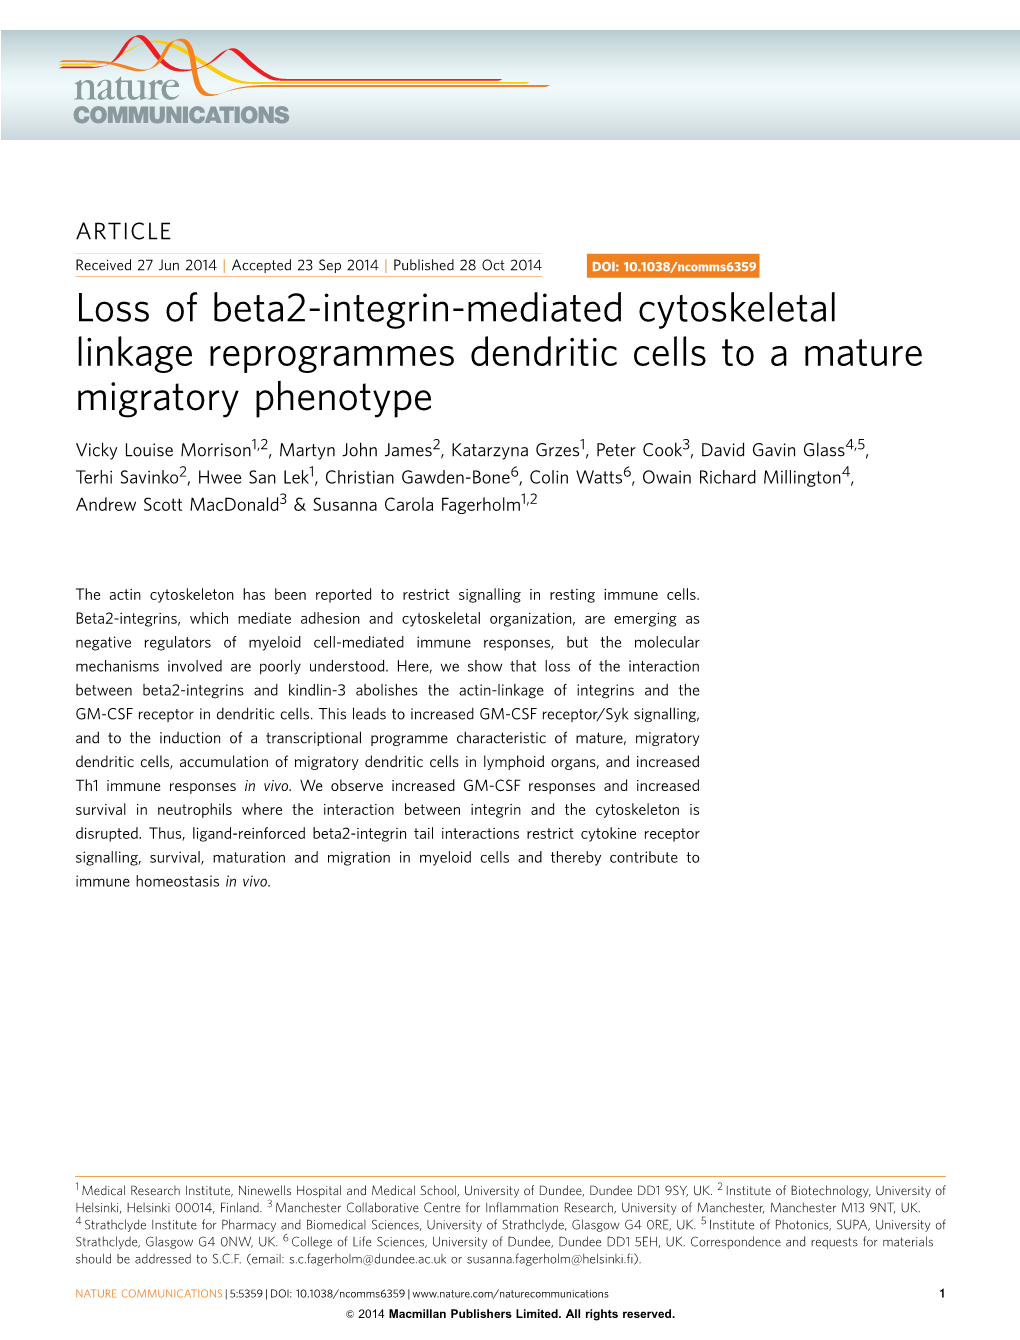 Loss of Beta2-Integrin-Mediated Cytoskeletal Linkage Reprogrammes Dendritic Cells to a Mature Migratory Phenotype